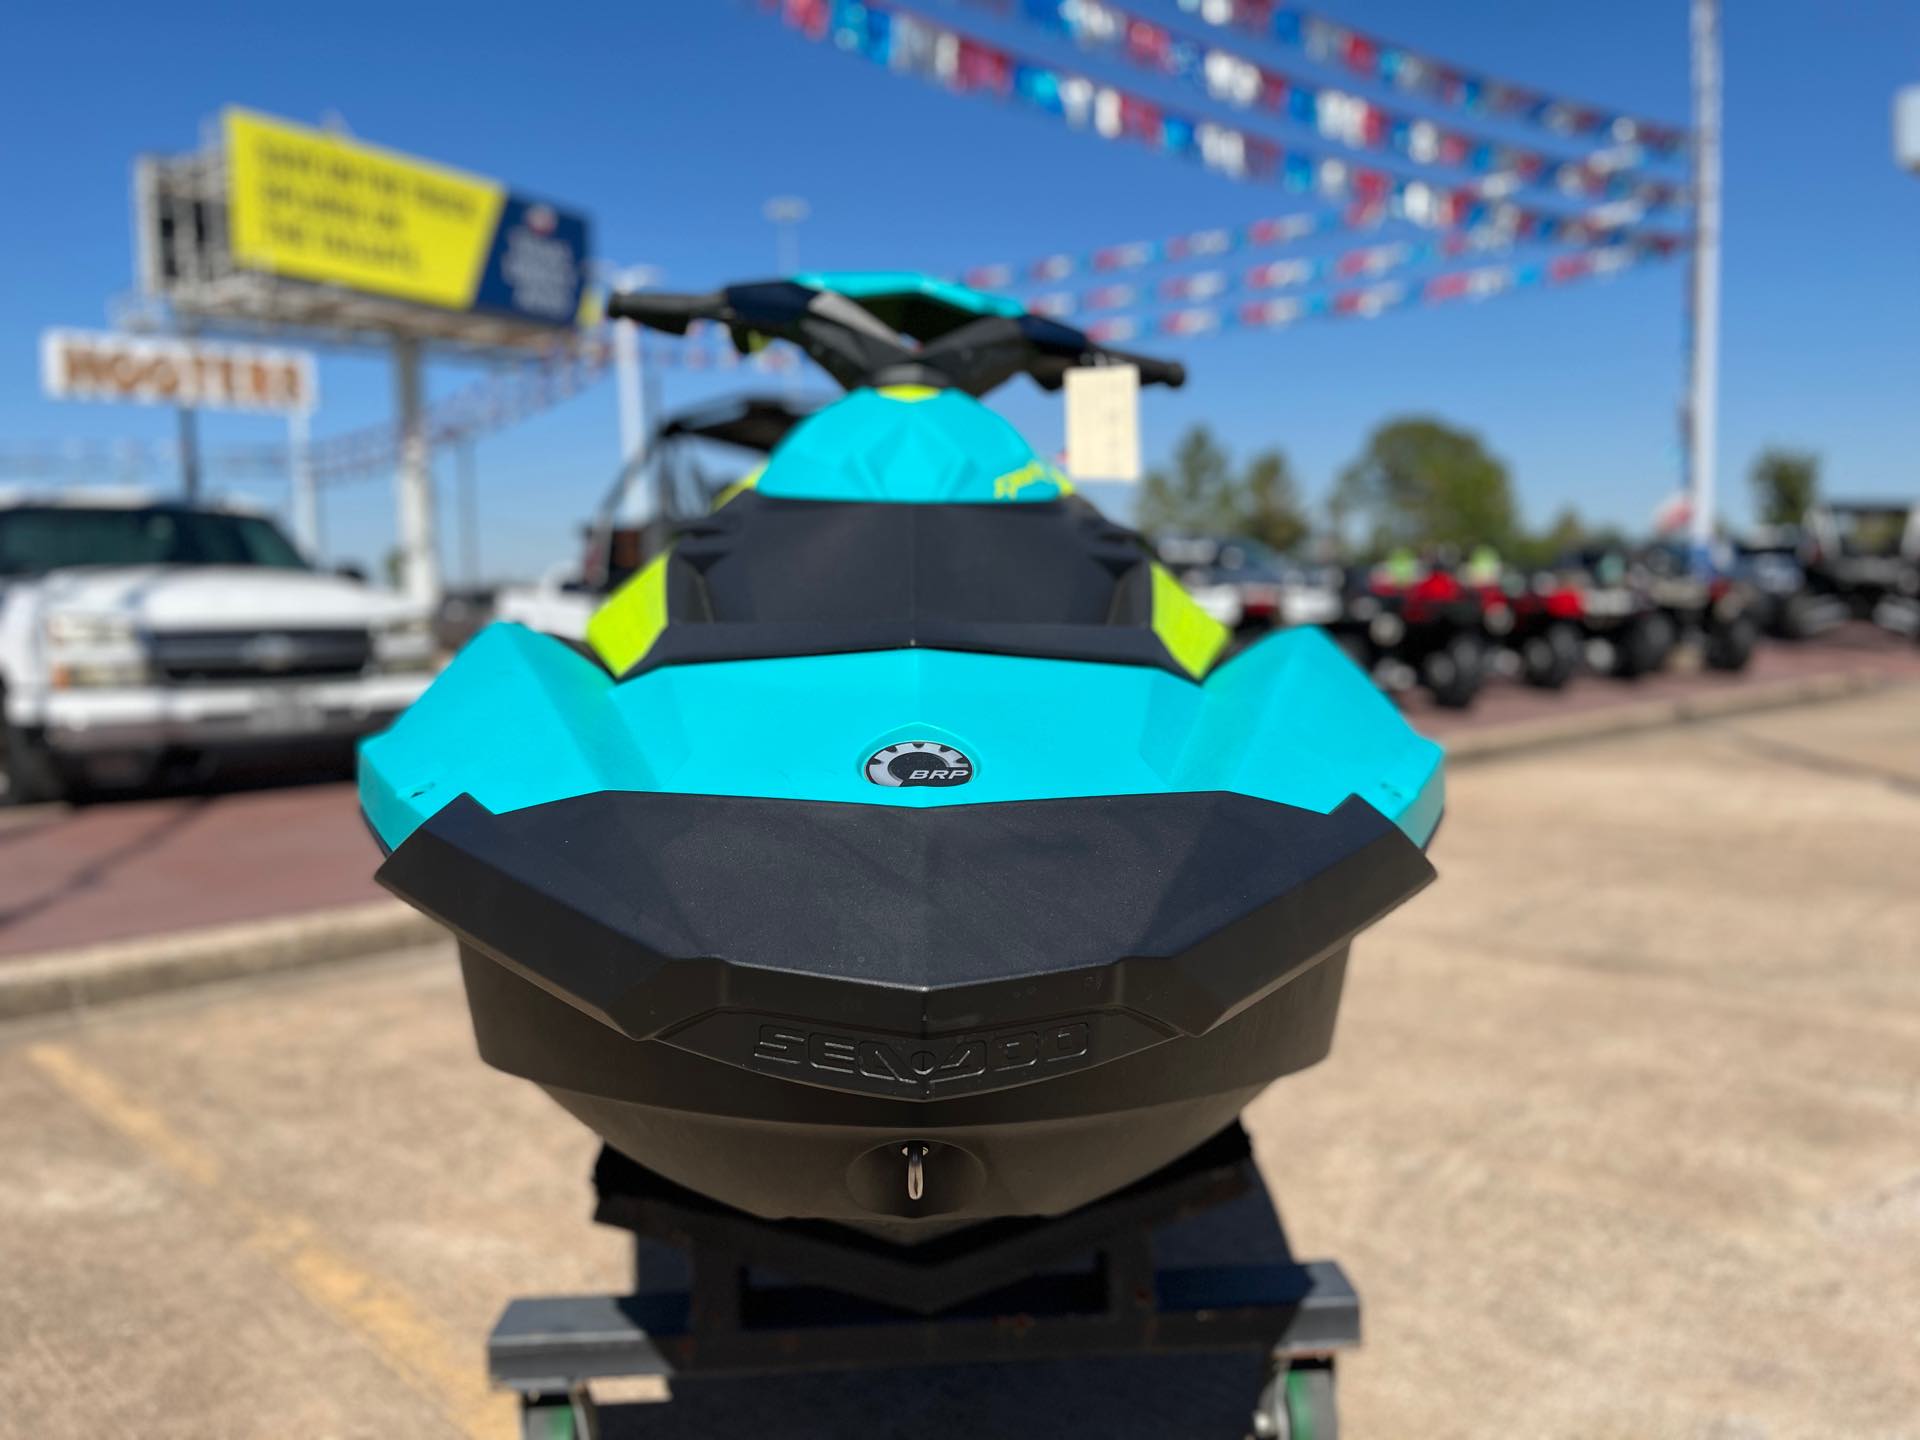 2022 Sea-Doo Spark 2-Up Rotax 900 ACE - 90 at Wild West Motoplex